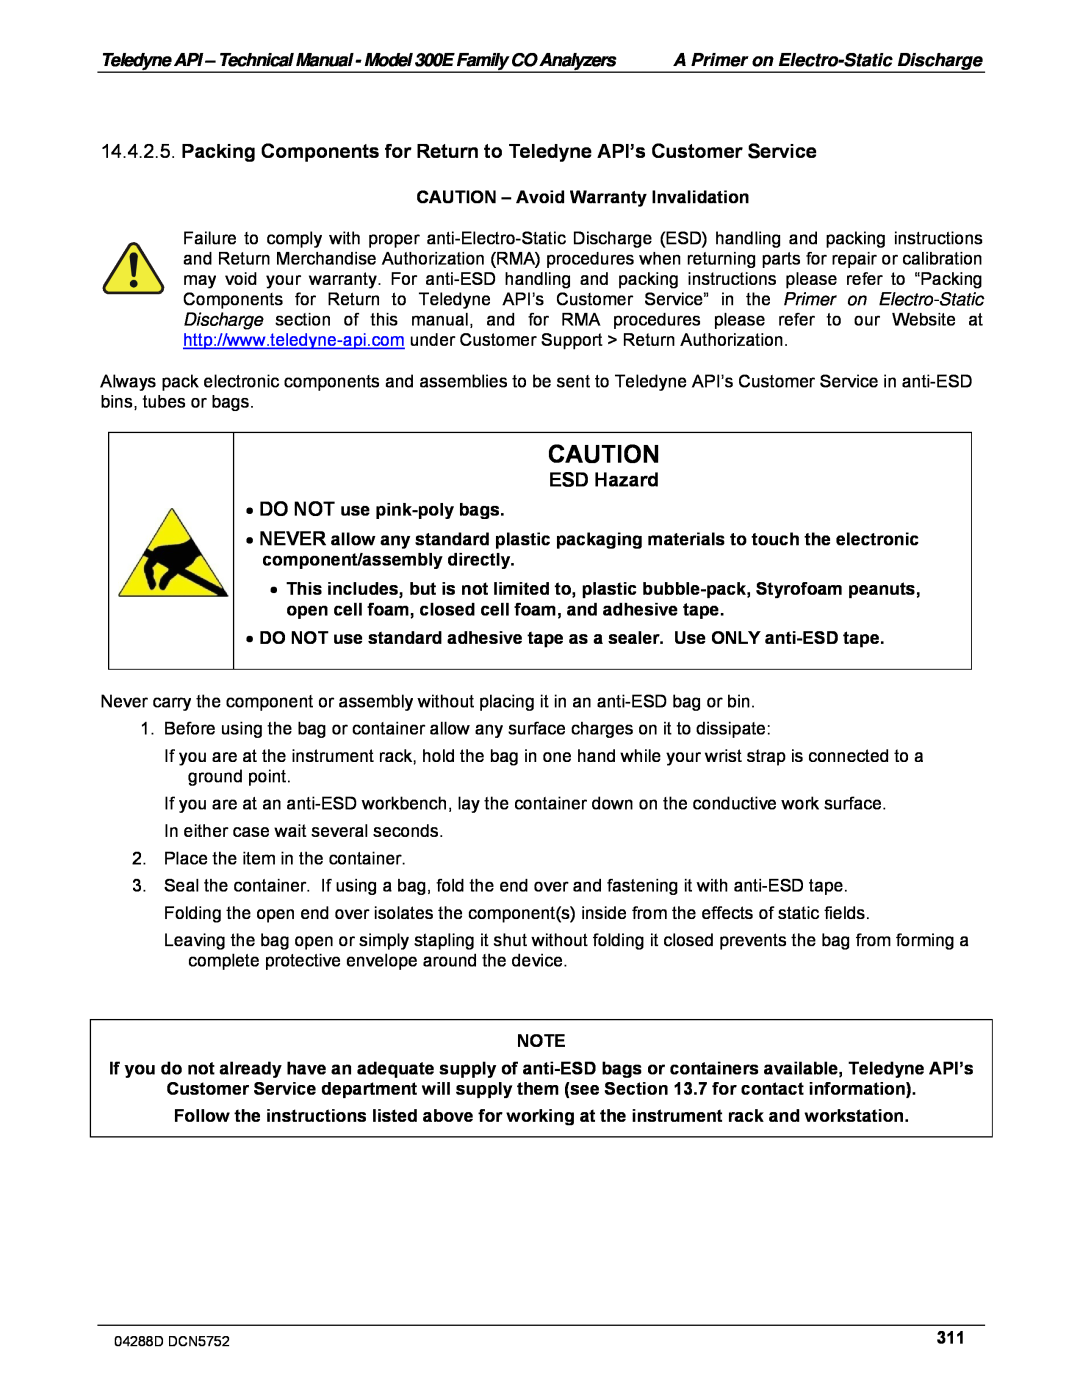 Teledyne M300EM operation manual ESD Hazard, CAUTION – Avoid Warranty Invalidation, ∙DO NOT use pink-polybags 